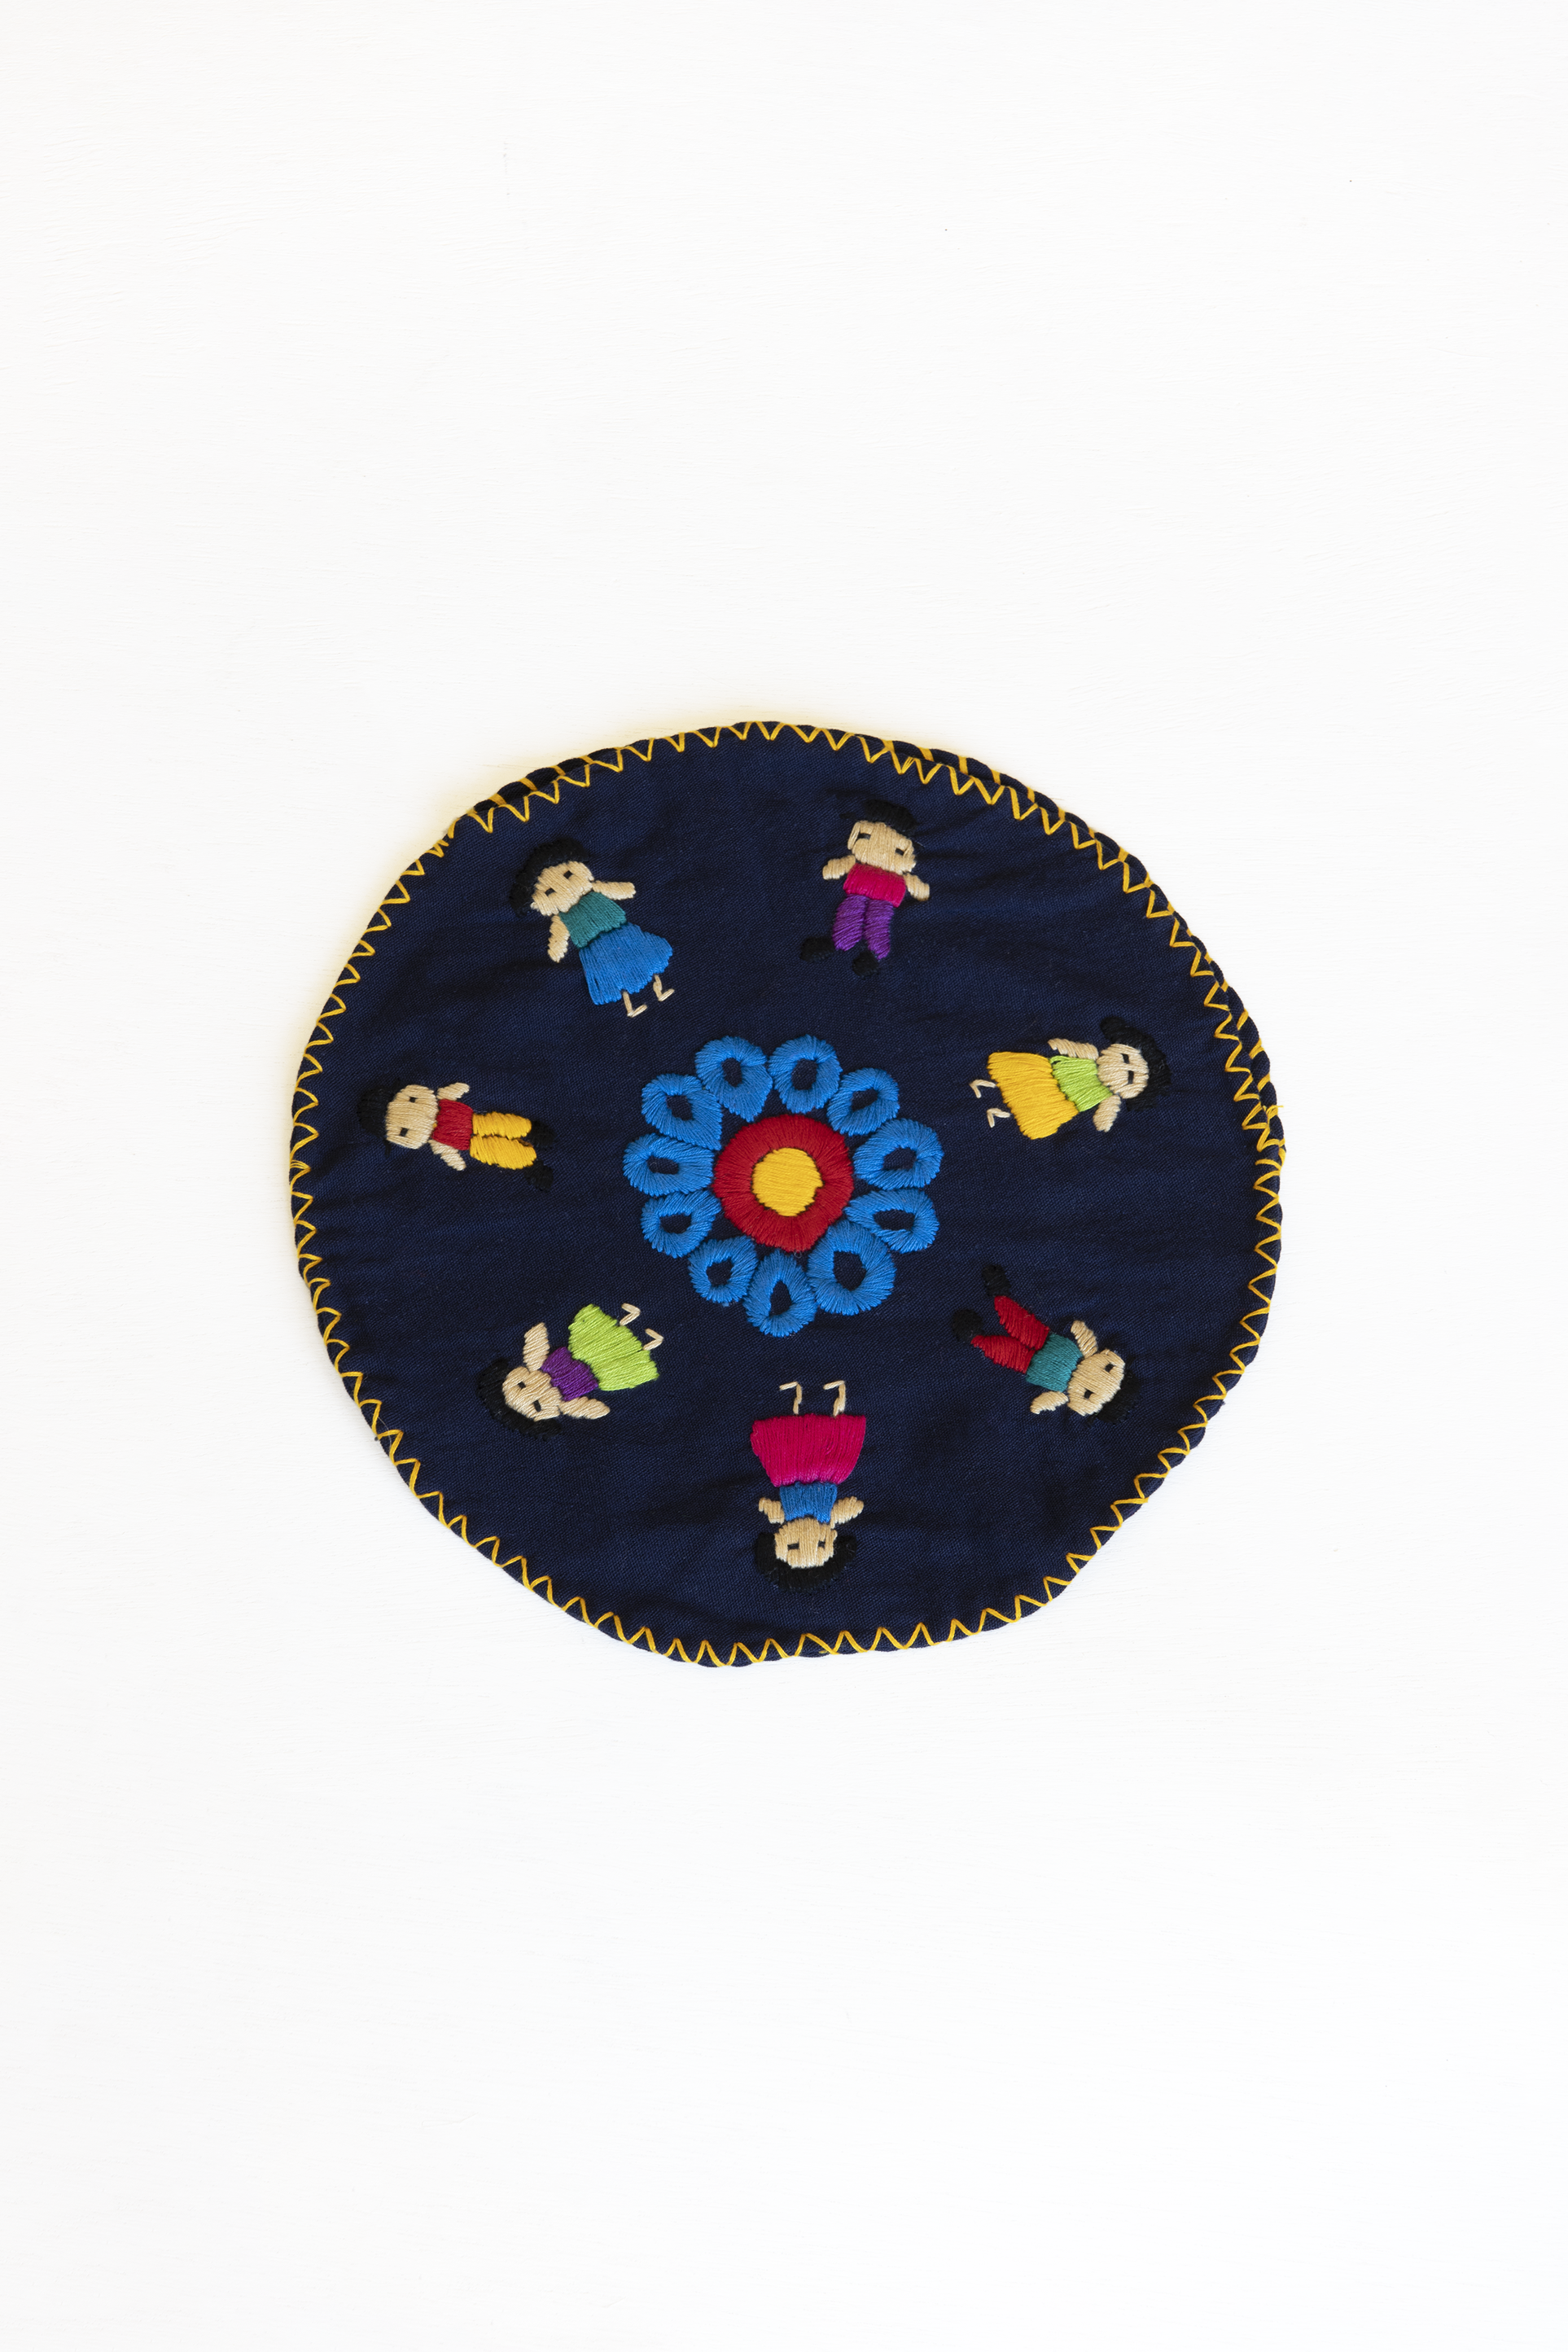 CHIAPAS Hand embroidered Tortillero